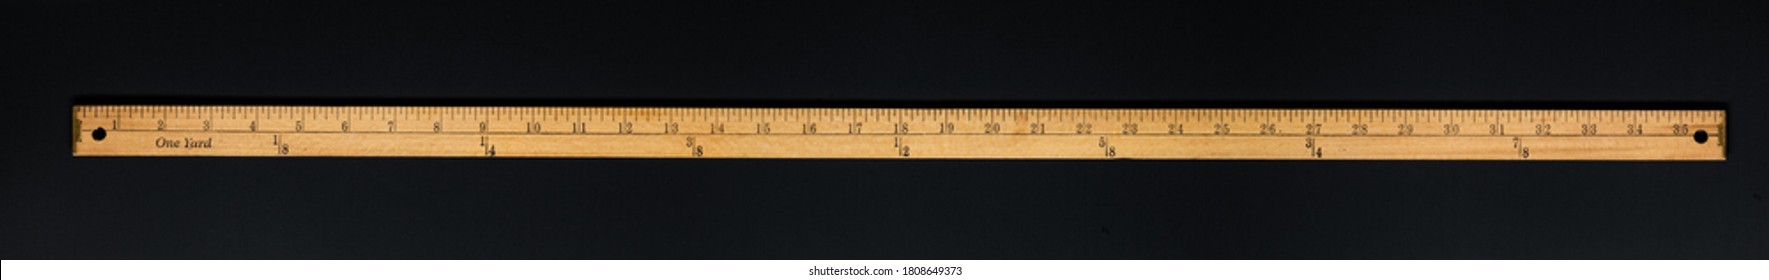 Wooden yardstick on black backgrounds whit inches and yard fractions scales.